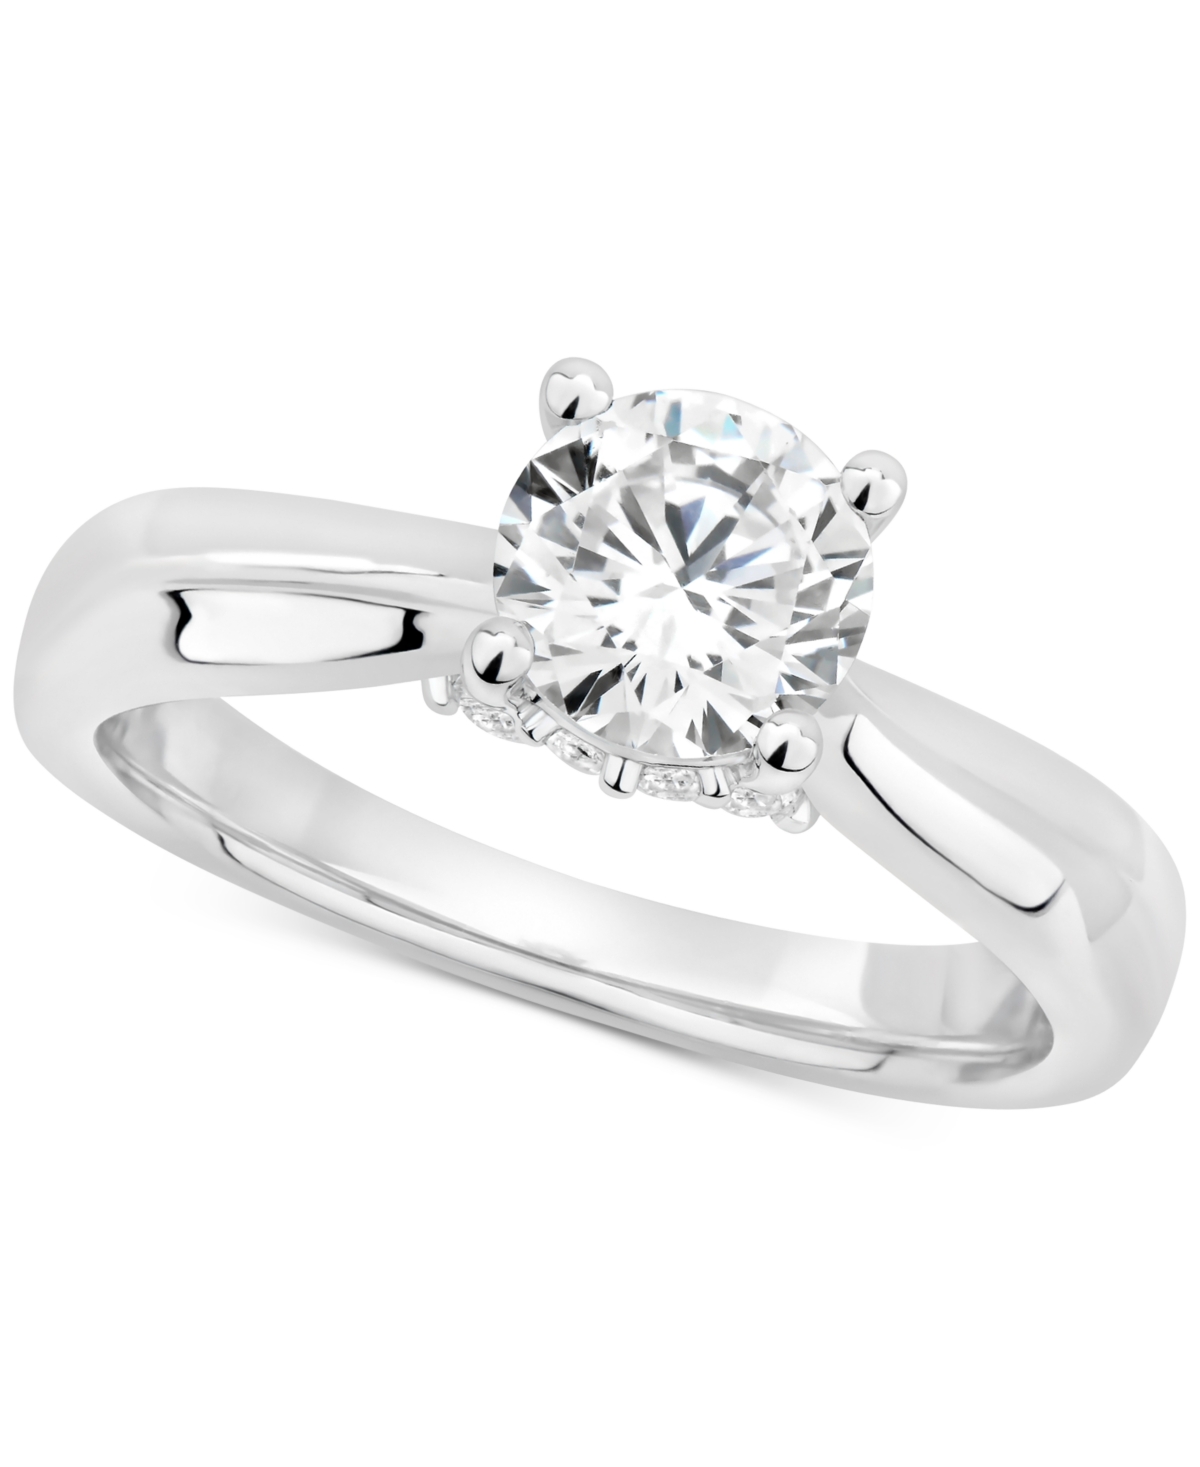 Gia Certified Diamonds Gia Certified Diamond Solitaire Engagement Ring (1-1/2 ct. t.w.) in 14k White Gold